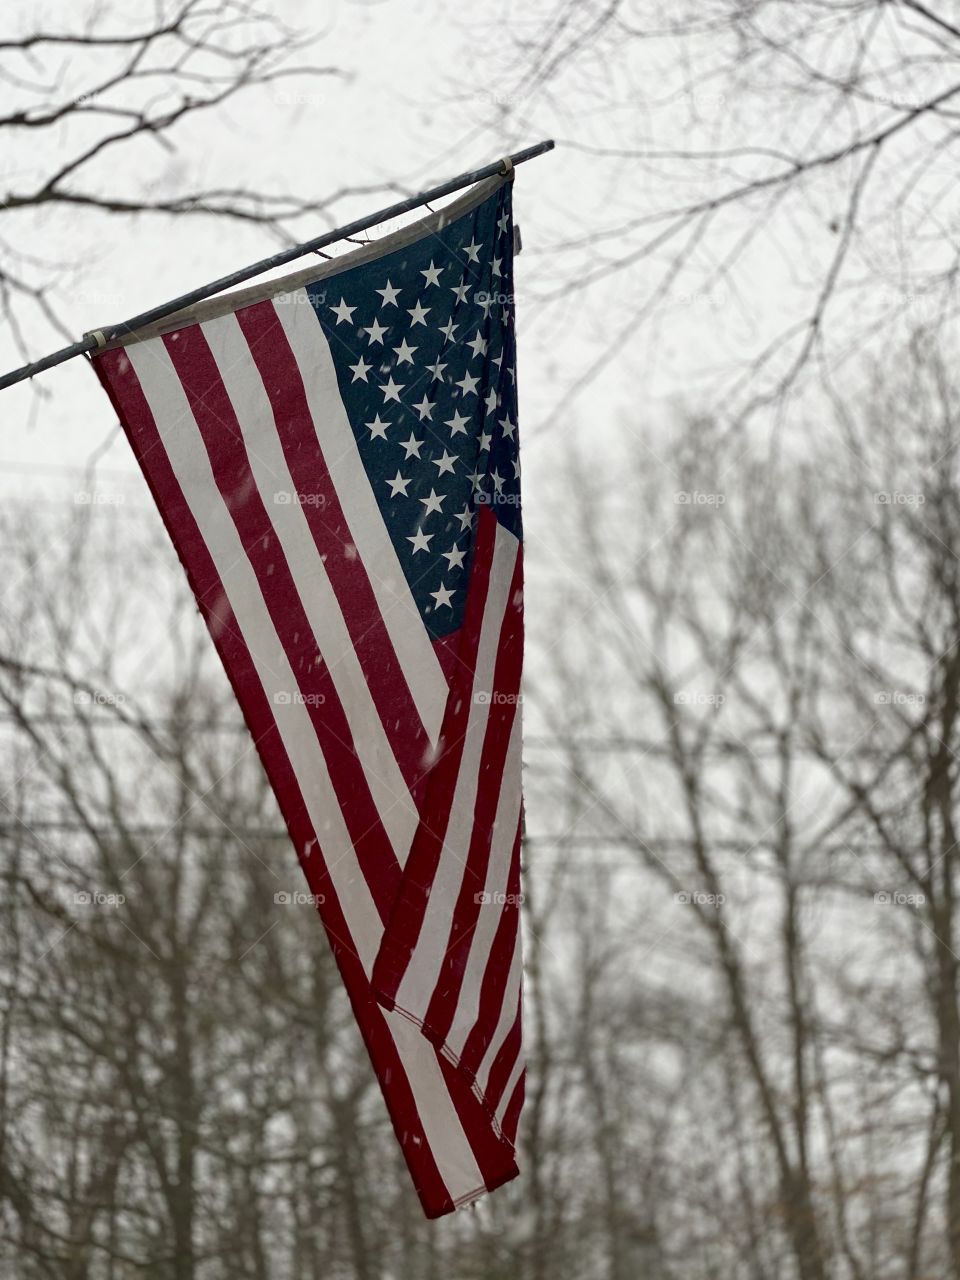 The weather outside is frightful but our Flag makes it look delightful; American Flag settled in a snow storm